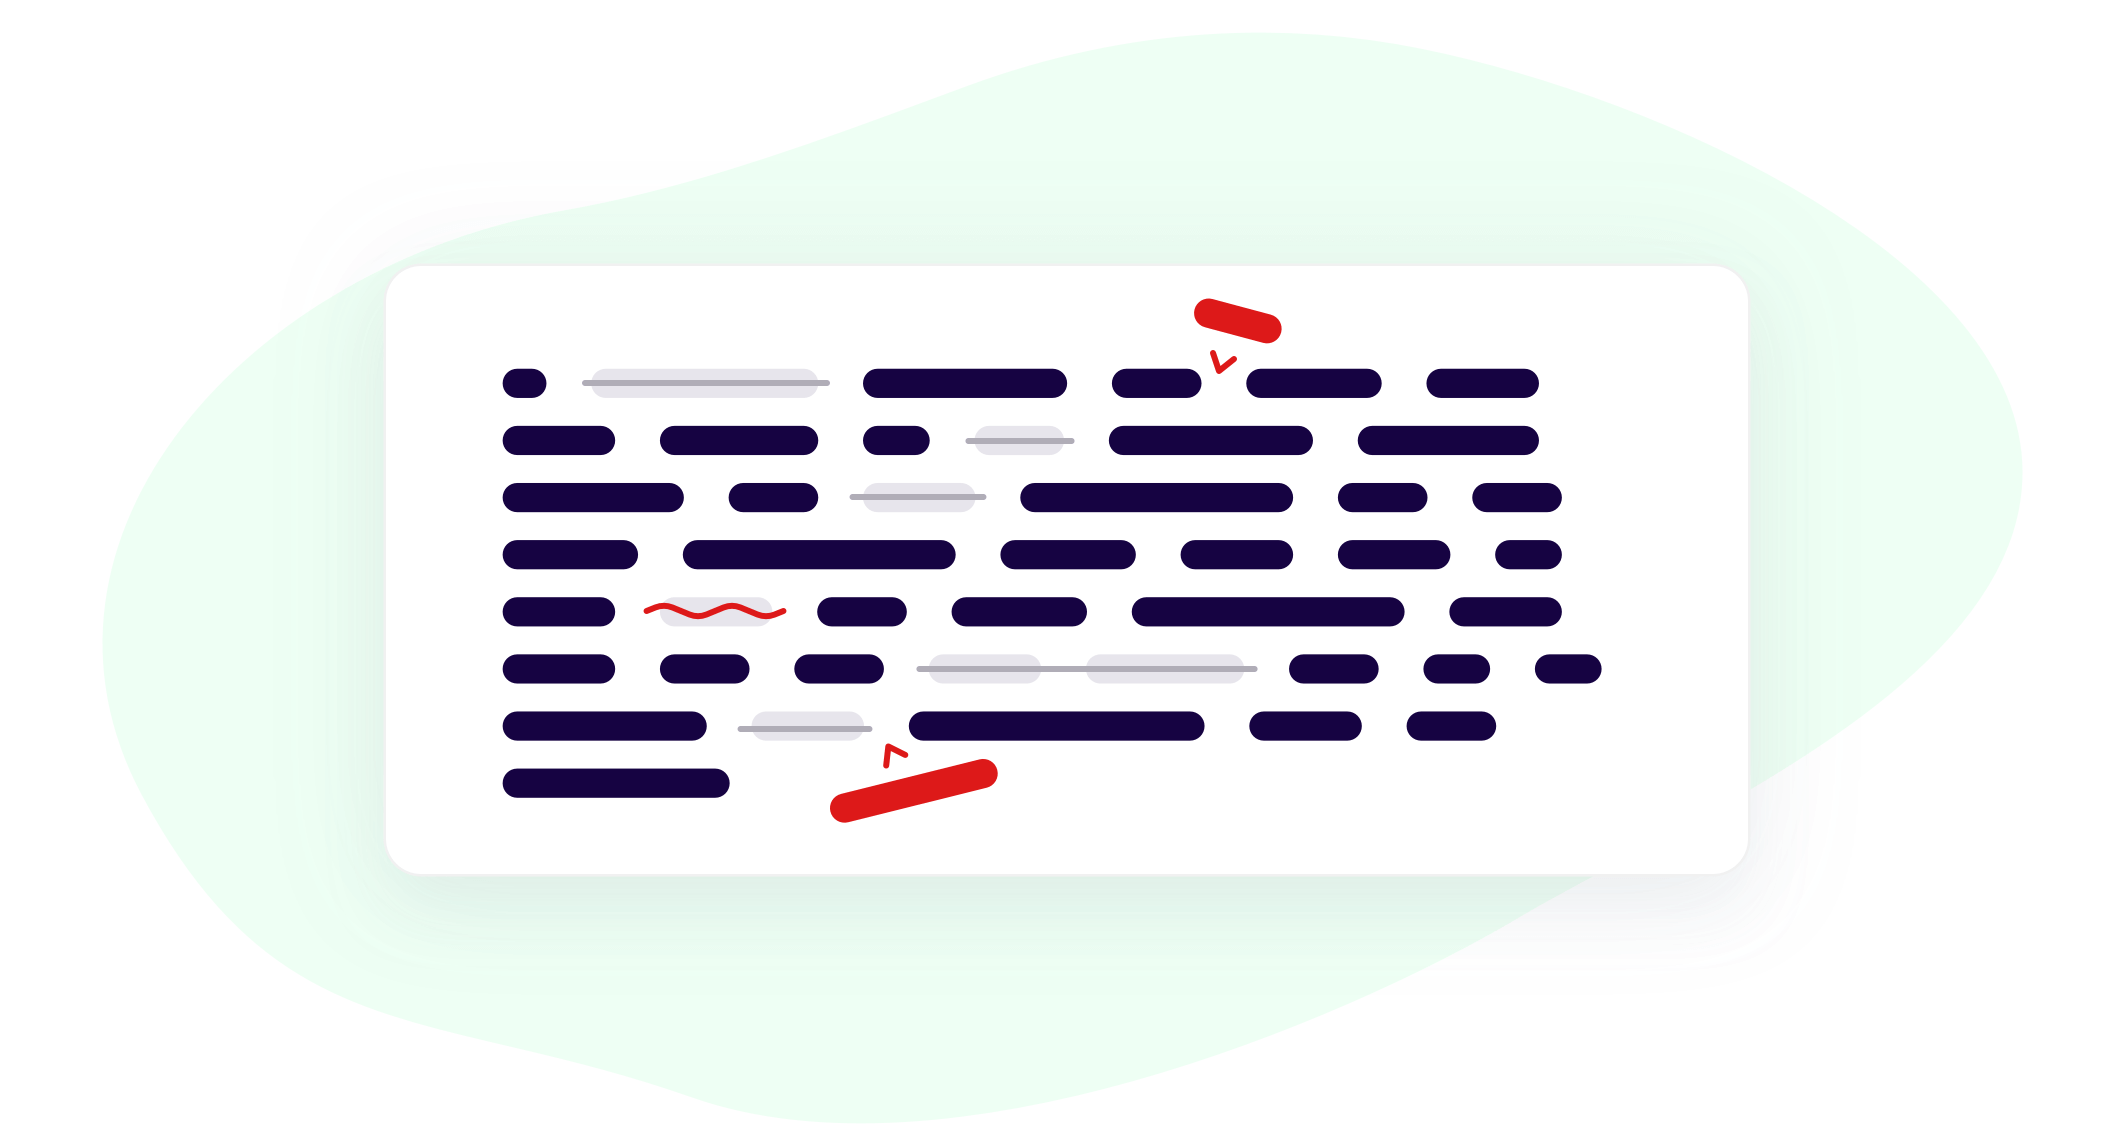 abstract diagram of a review descrption being edited